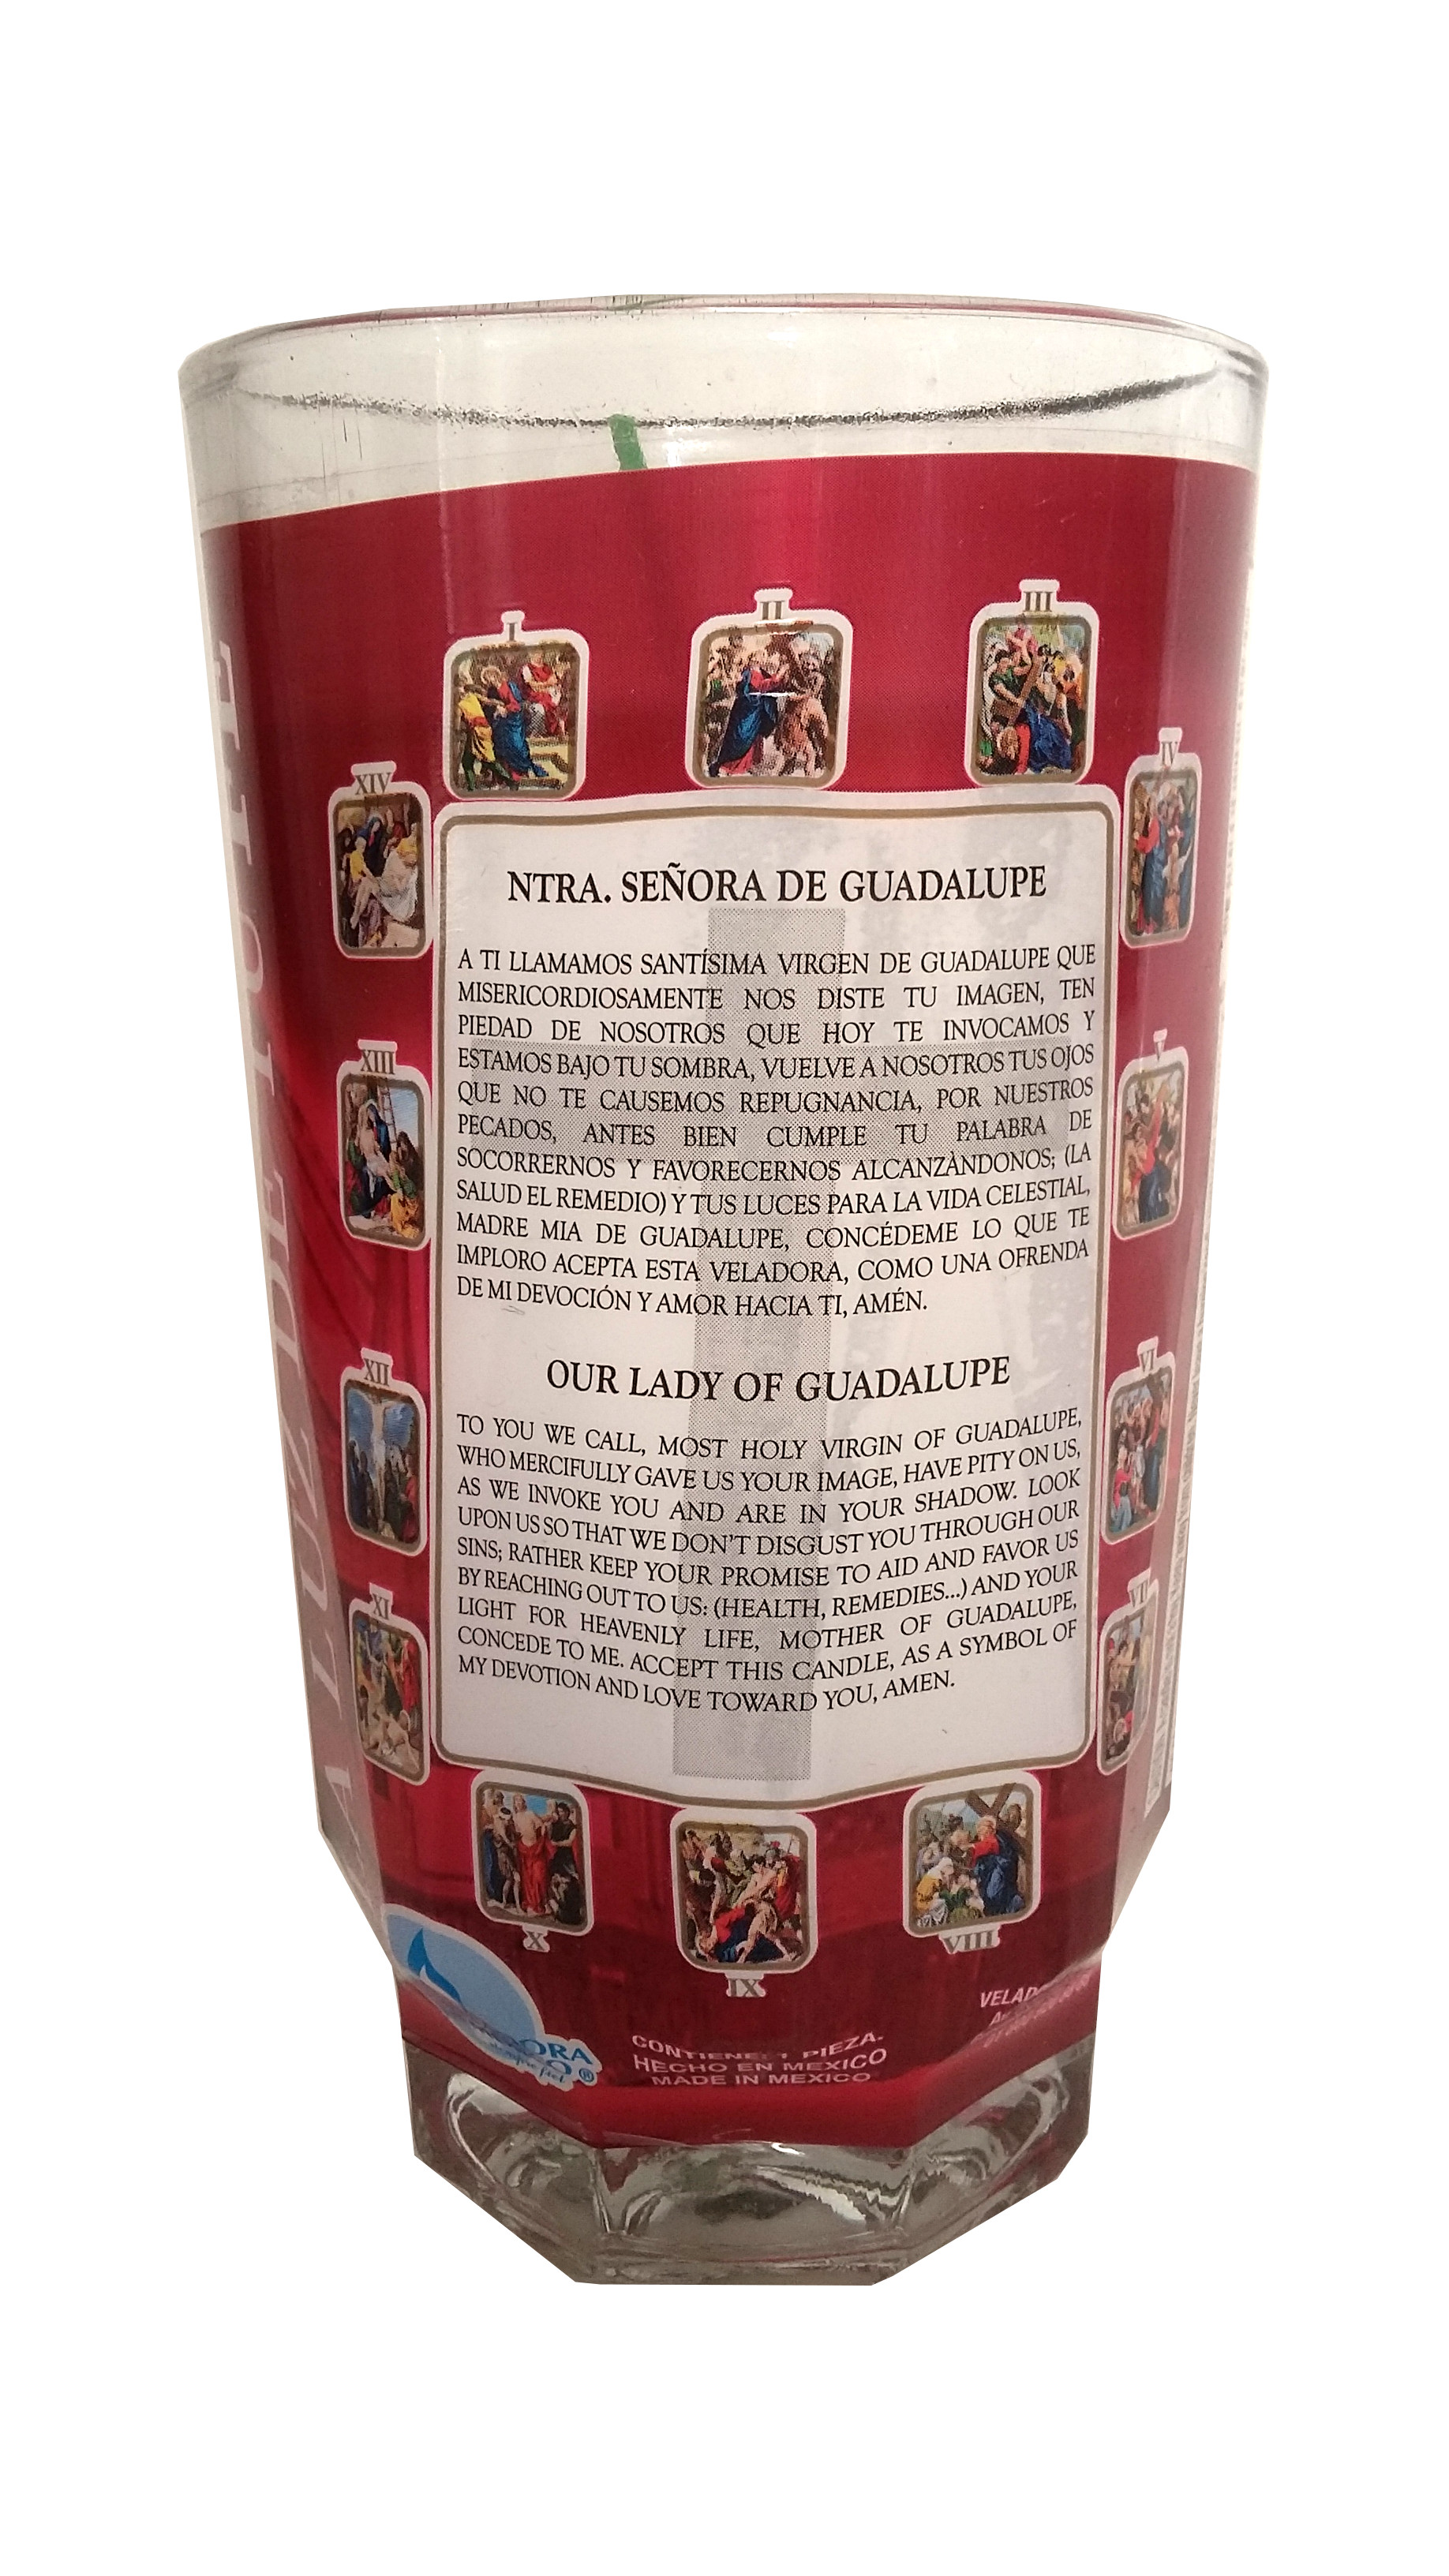 Our Lady of Guadalupe (Ntra, Senora de Guadalupe) Devotional Candle - image 2 of 2